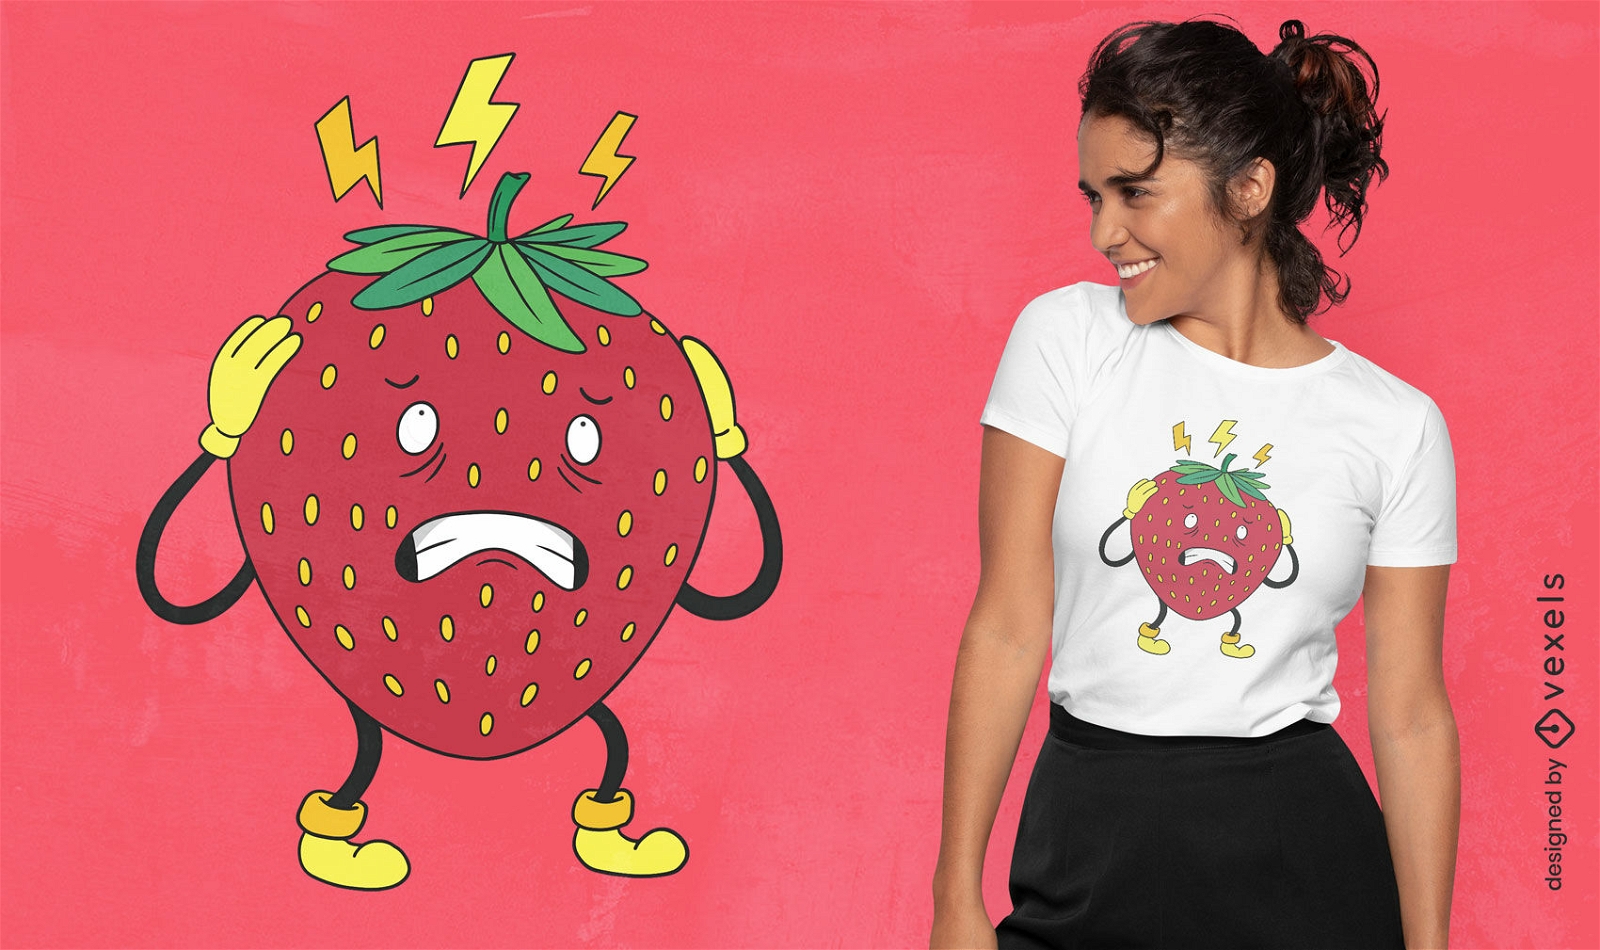 Cartoon strawberry stressed out t-shirt design